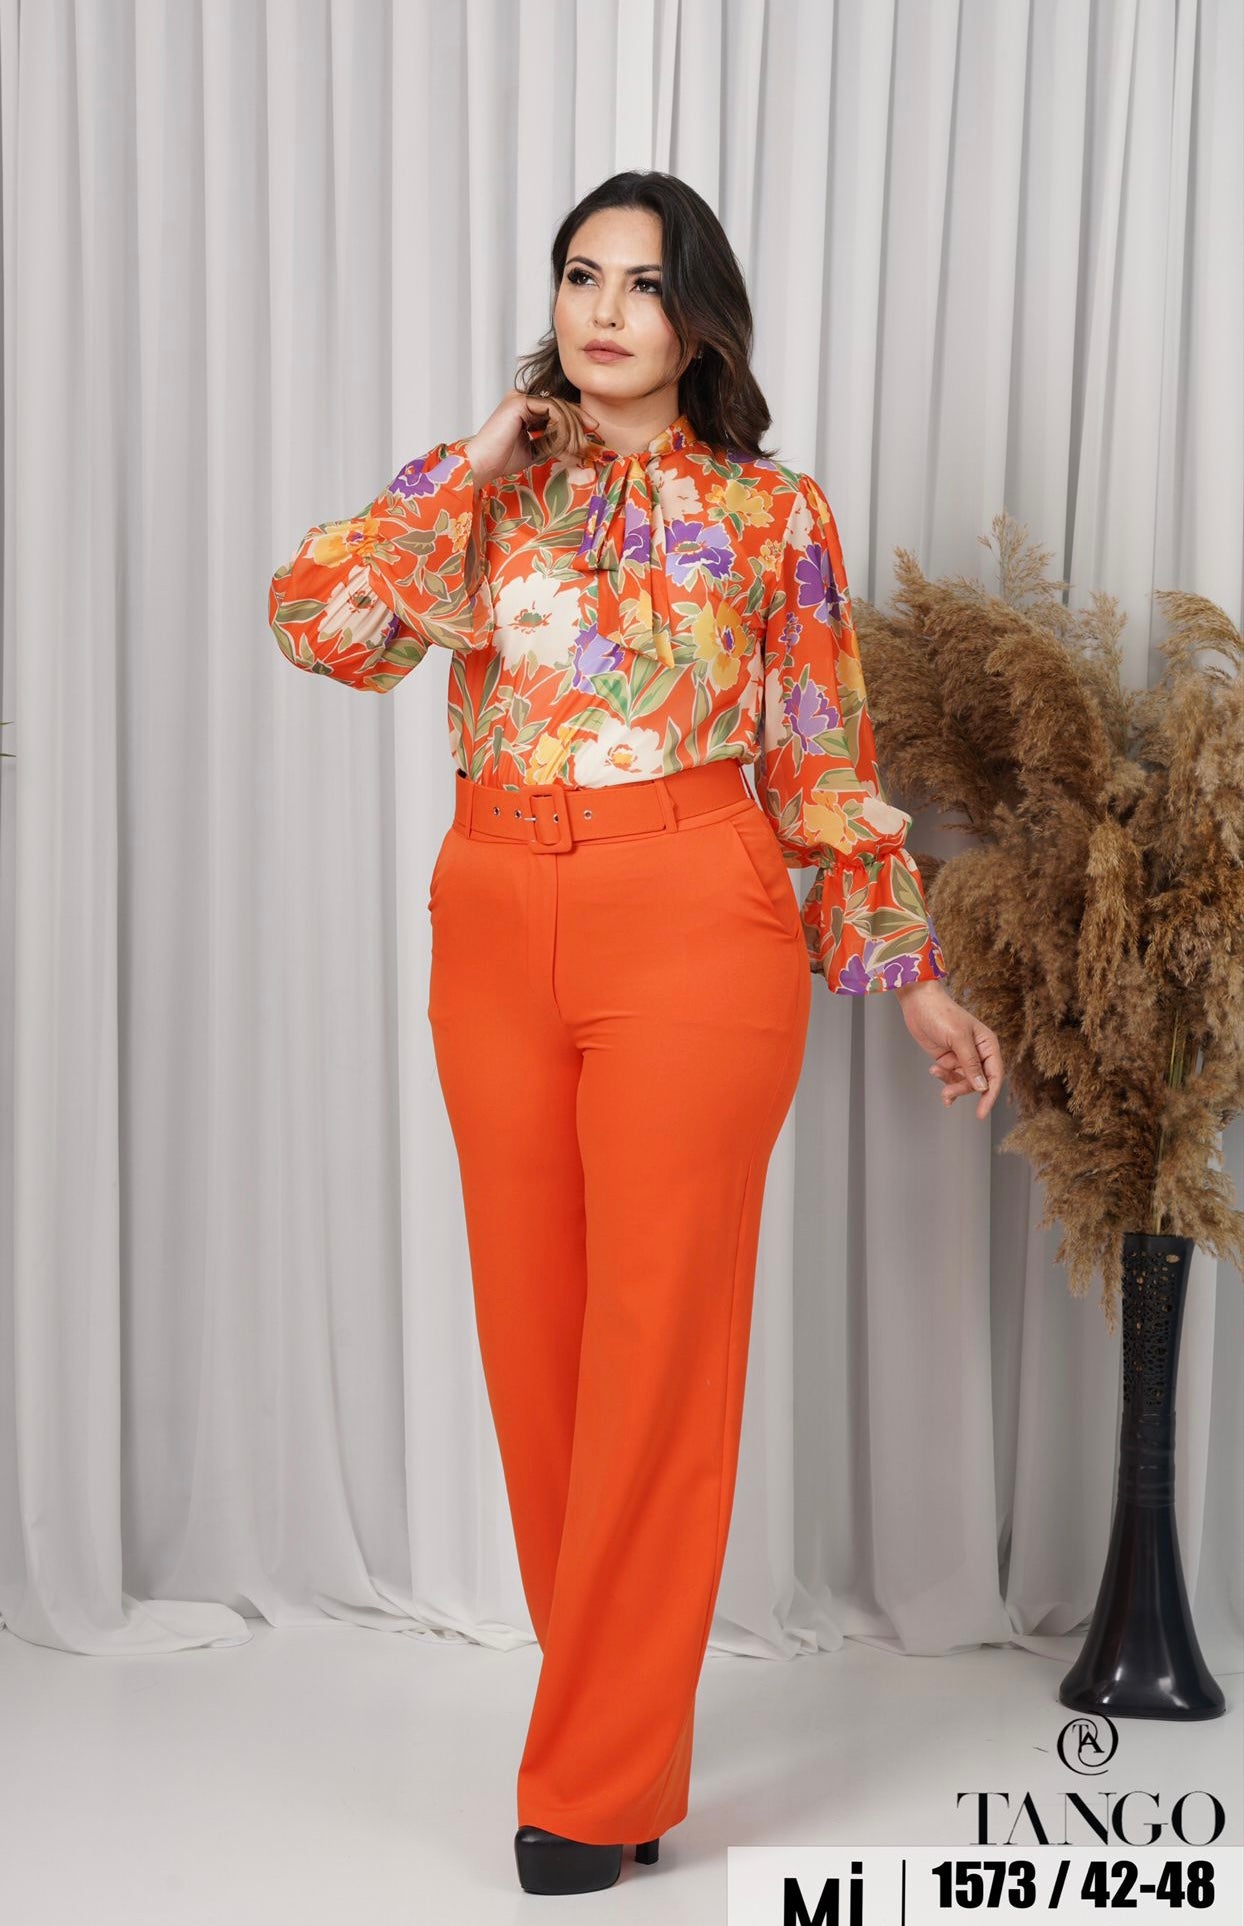 Esious beautiful pant and blouse